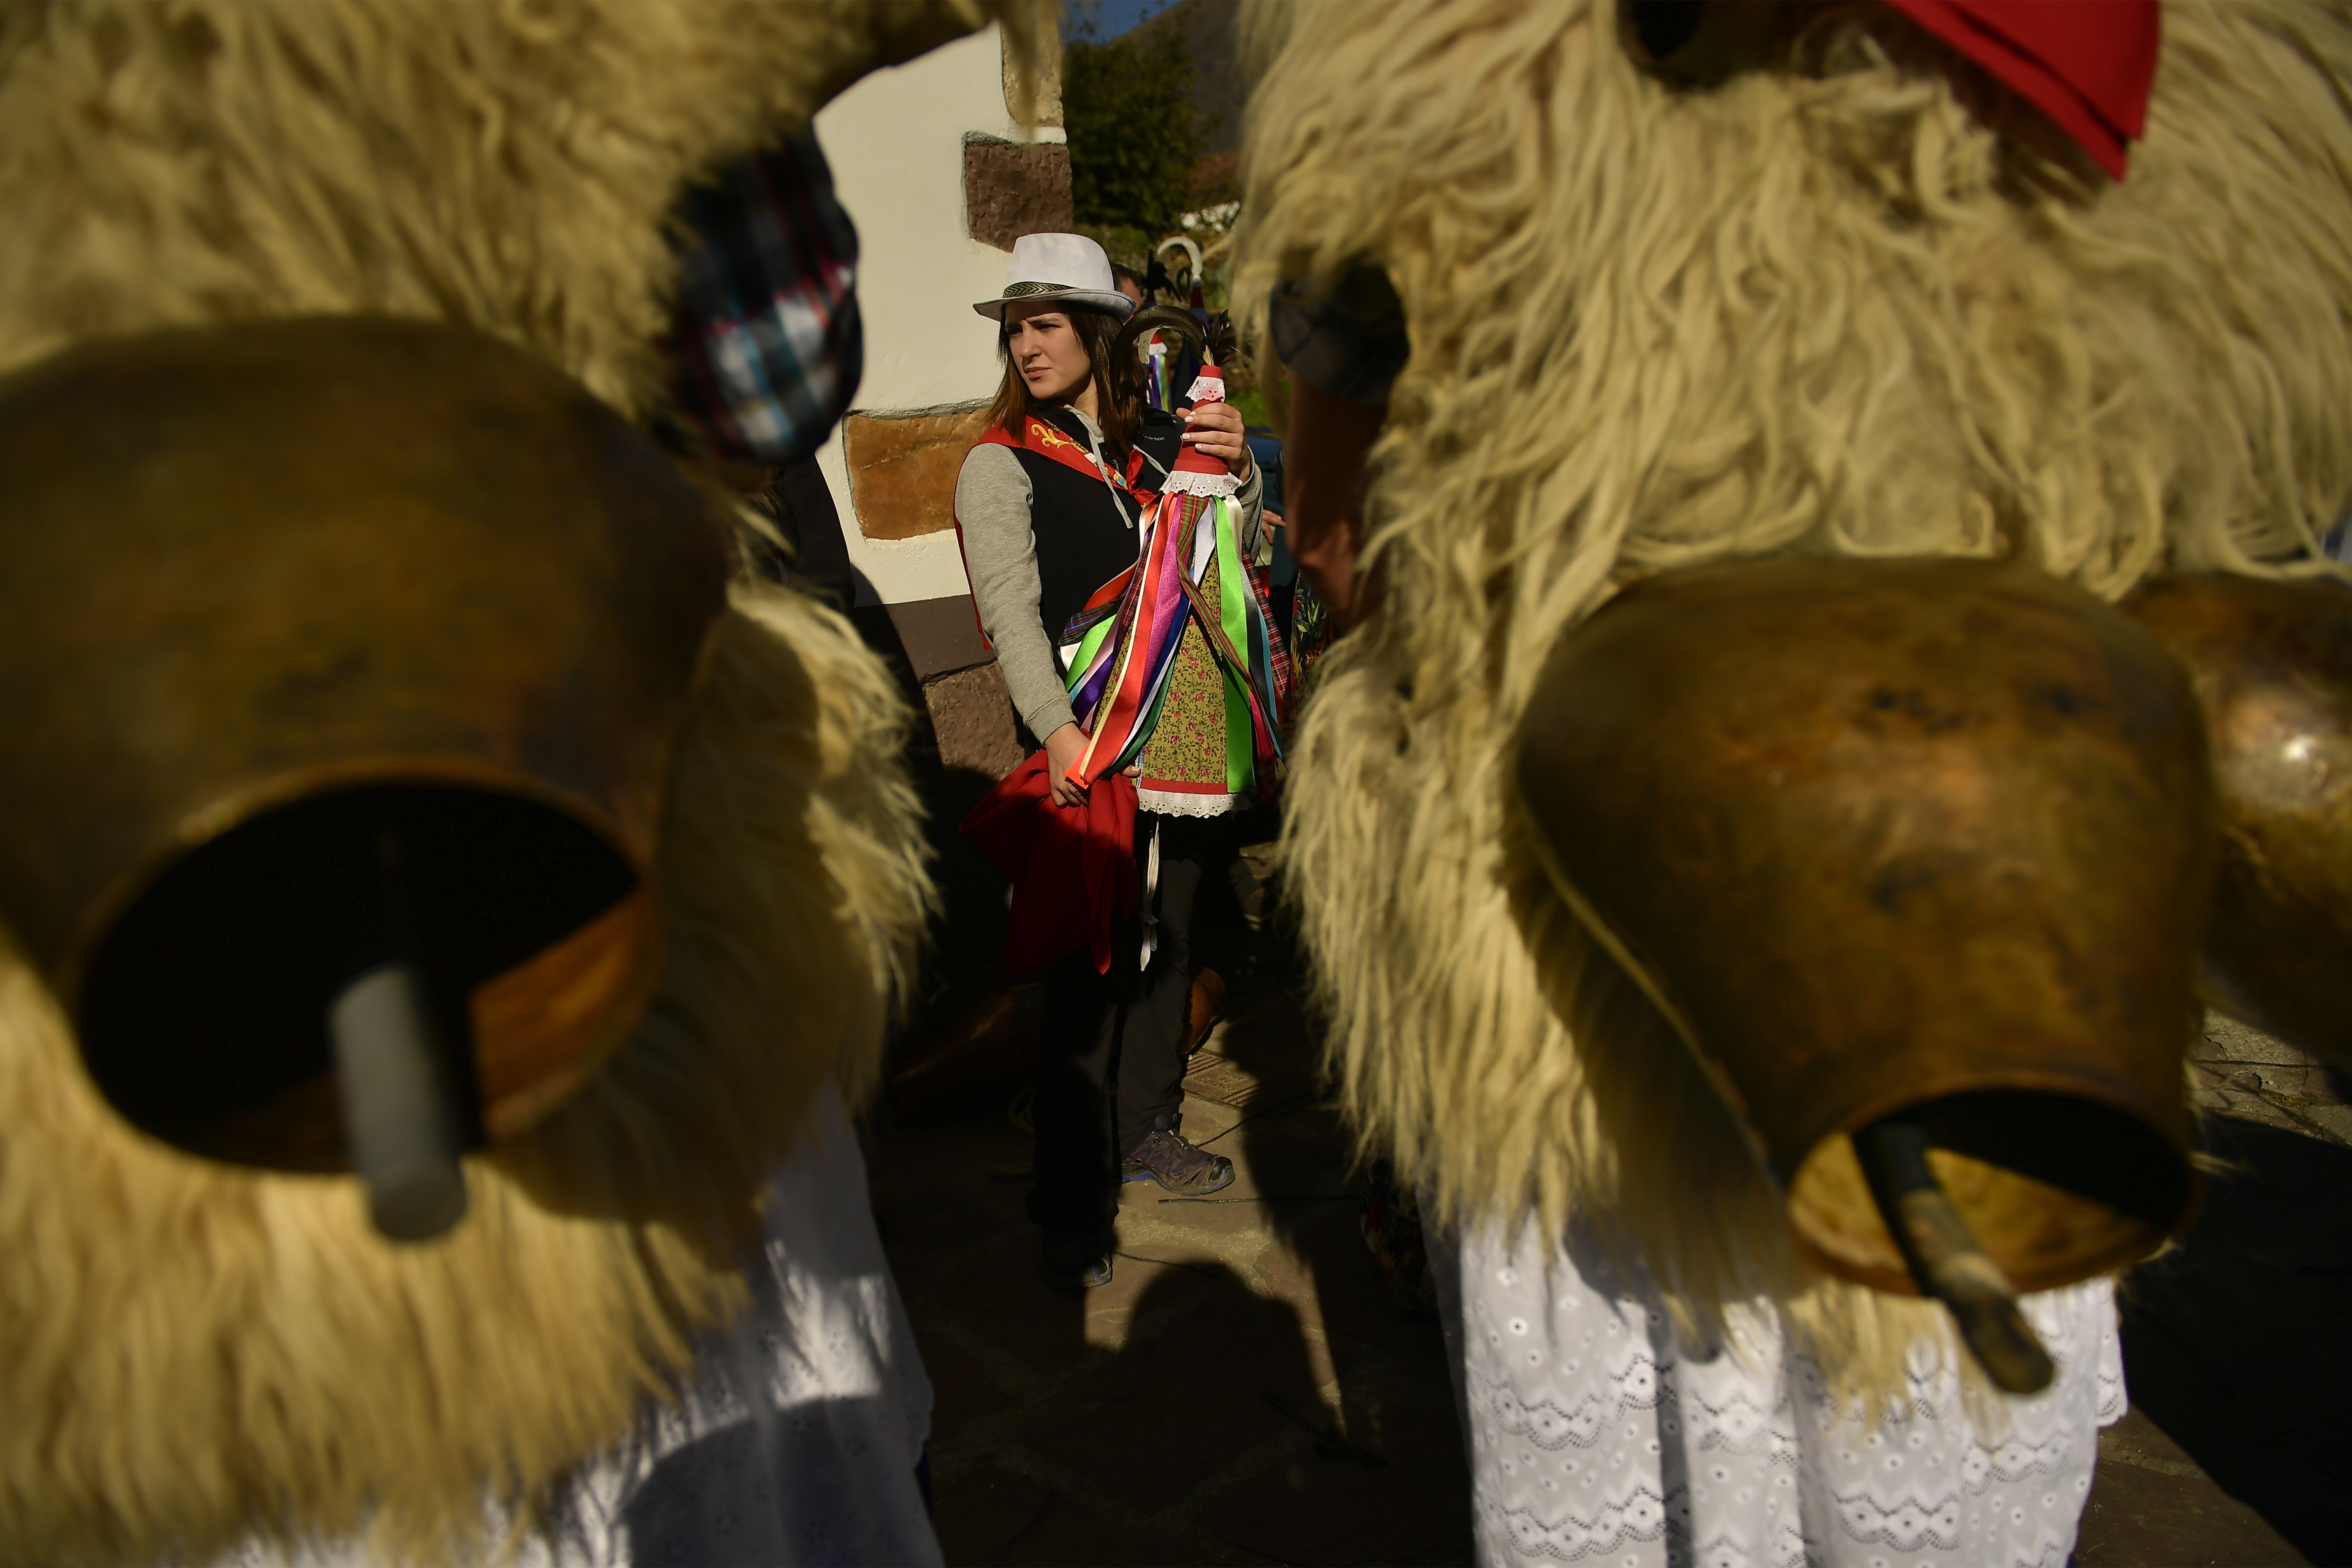 A Joaldunak called Zanpantzar, center, prepares to takes part in the Carnival between the Pyrenees villages of Ituren and Zubieta, northern Spain, Monday, Jan. 29, 2018. In one of the most ancient carnivals in Europe, dating from before the Roman empire, companies of Joaldunak (cowbells) made up of residents of two towns, Ituren and Zubieta, parade the streets costumed in sandals, lace petticoats, sheepskins around the waist and shoulders, coloured neckerchiefs, conical caps with ribbons and a hyssop of horsehair in their right hands and cowbells hung across their lower back. (AP Photo/Alvaro Barrientos)